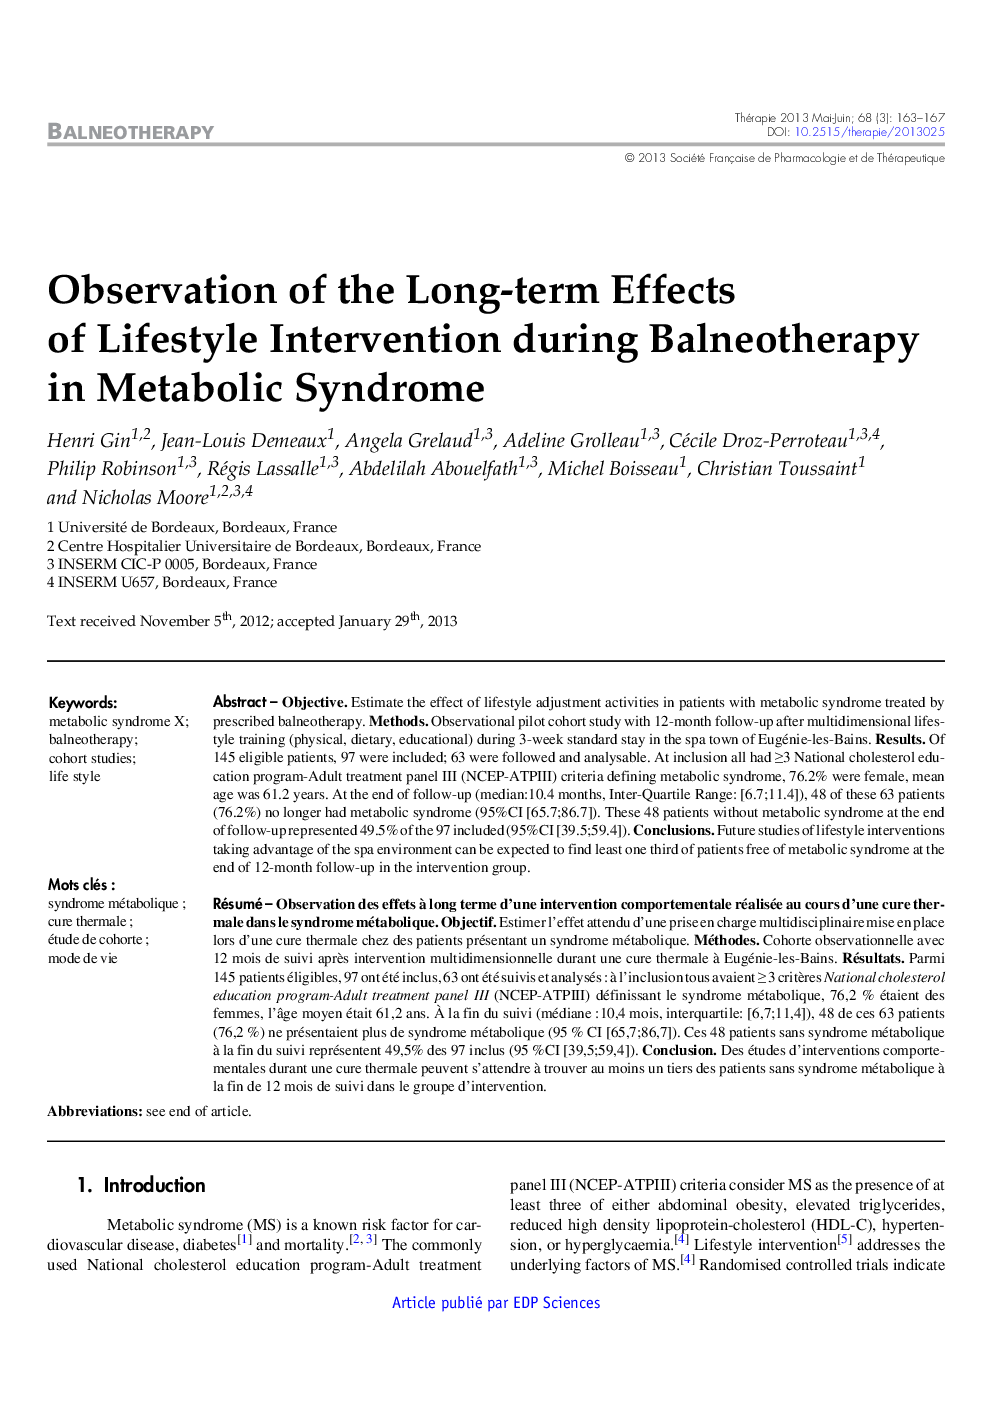 Observation of the Long-term Effects of Lifestyle Intervention during Balneotherapy in Metabolic Syndrome